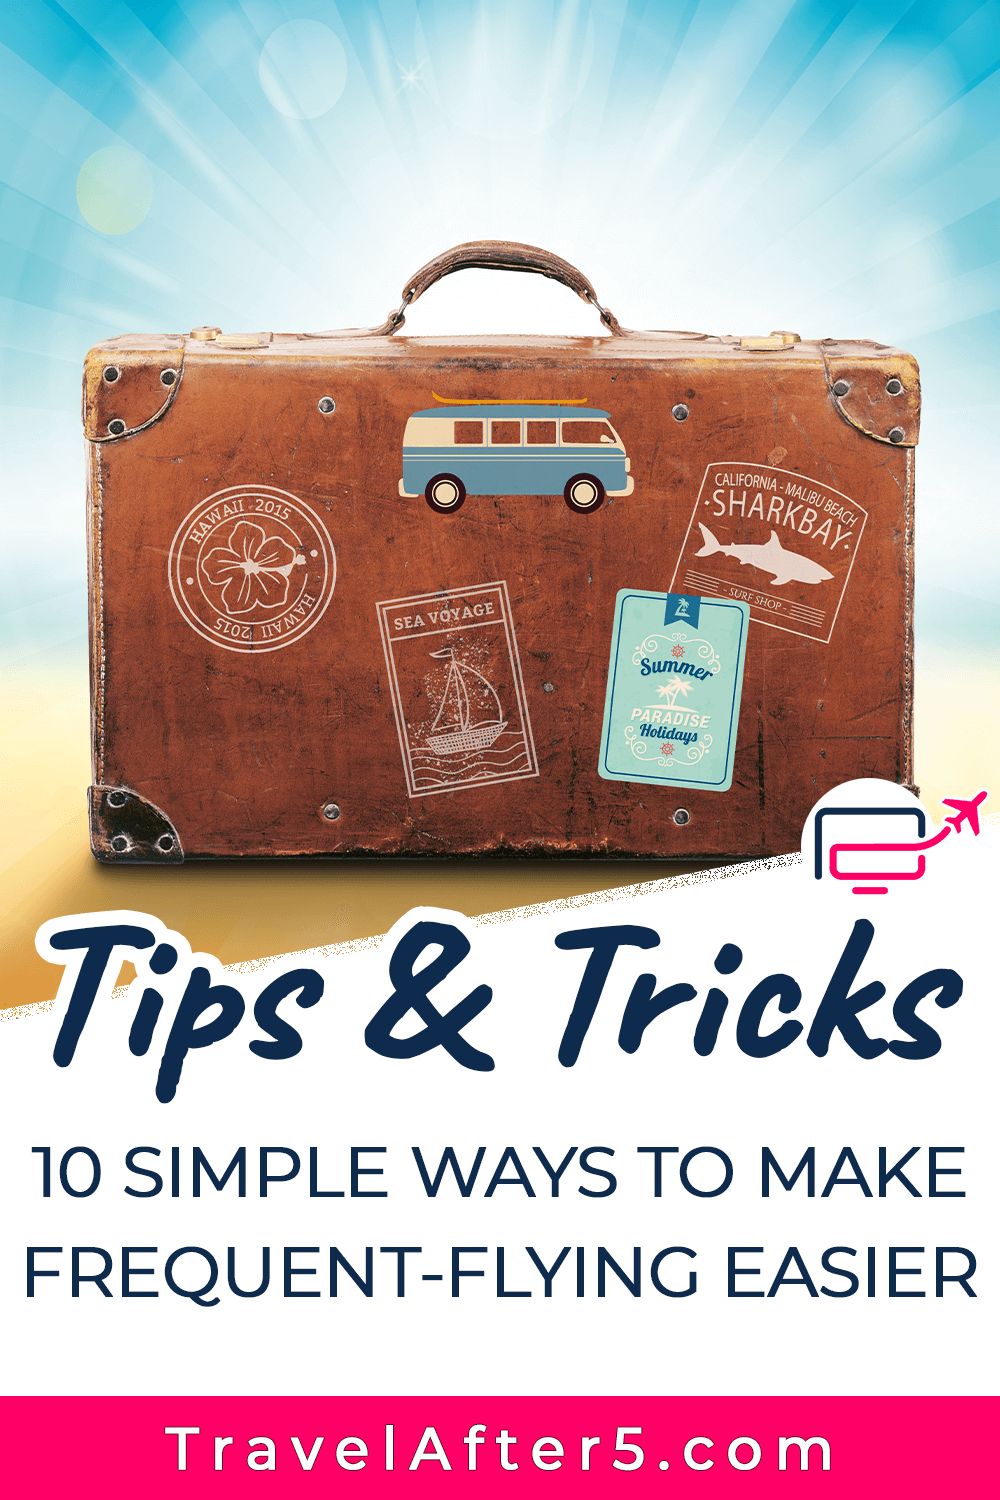 10 Simple Ways To Make Frequent-Flying Easier – Travel After 5